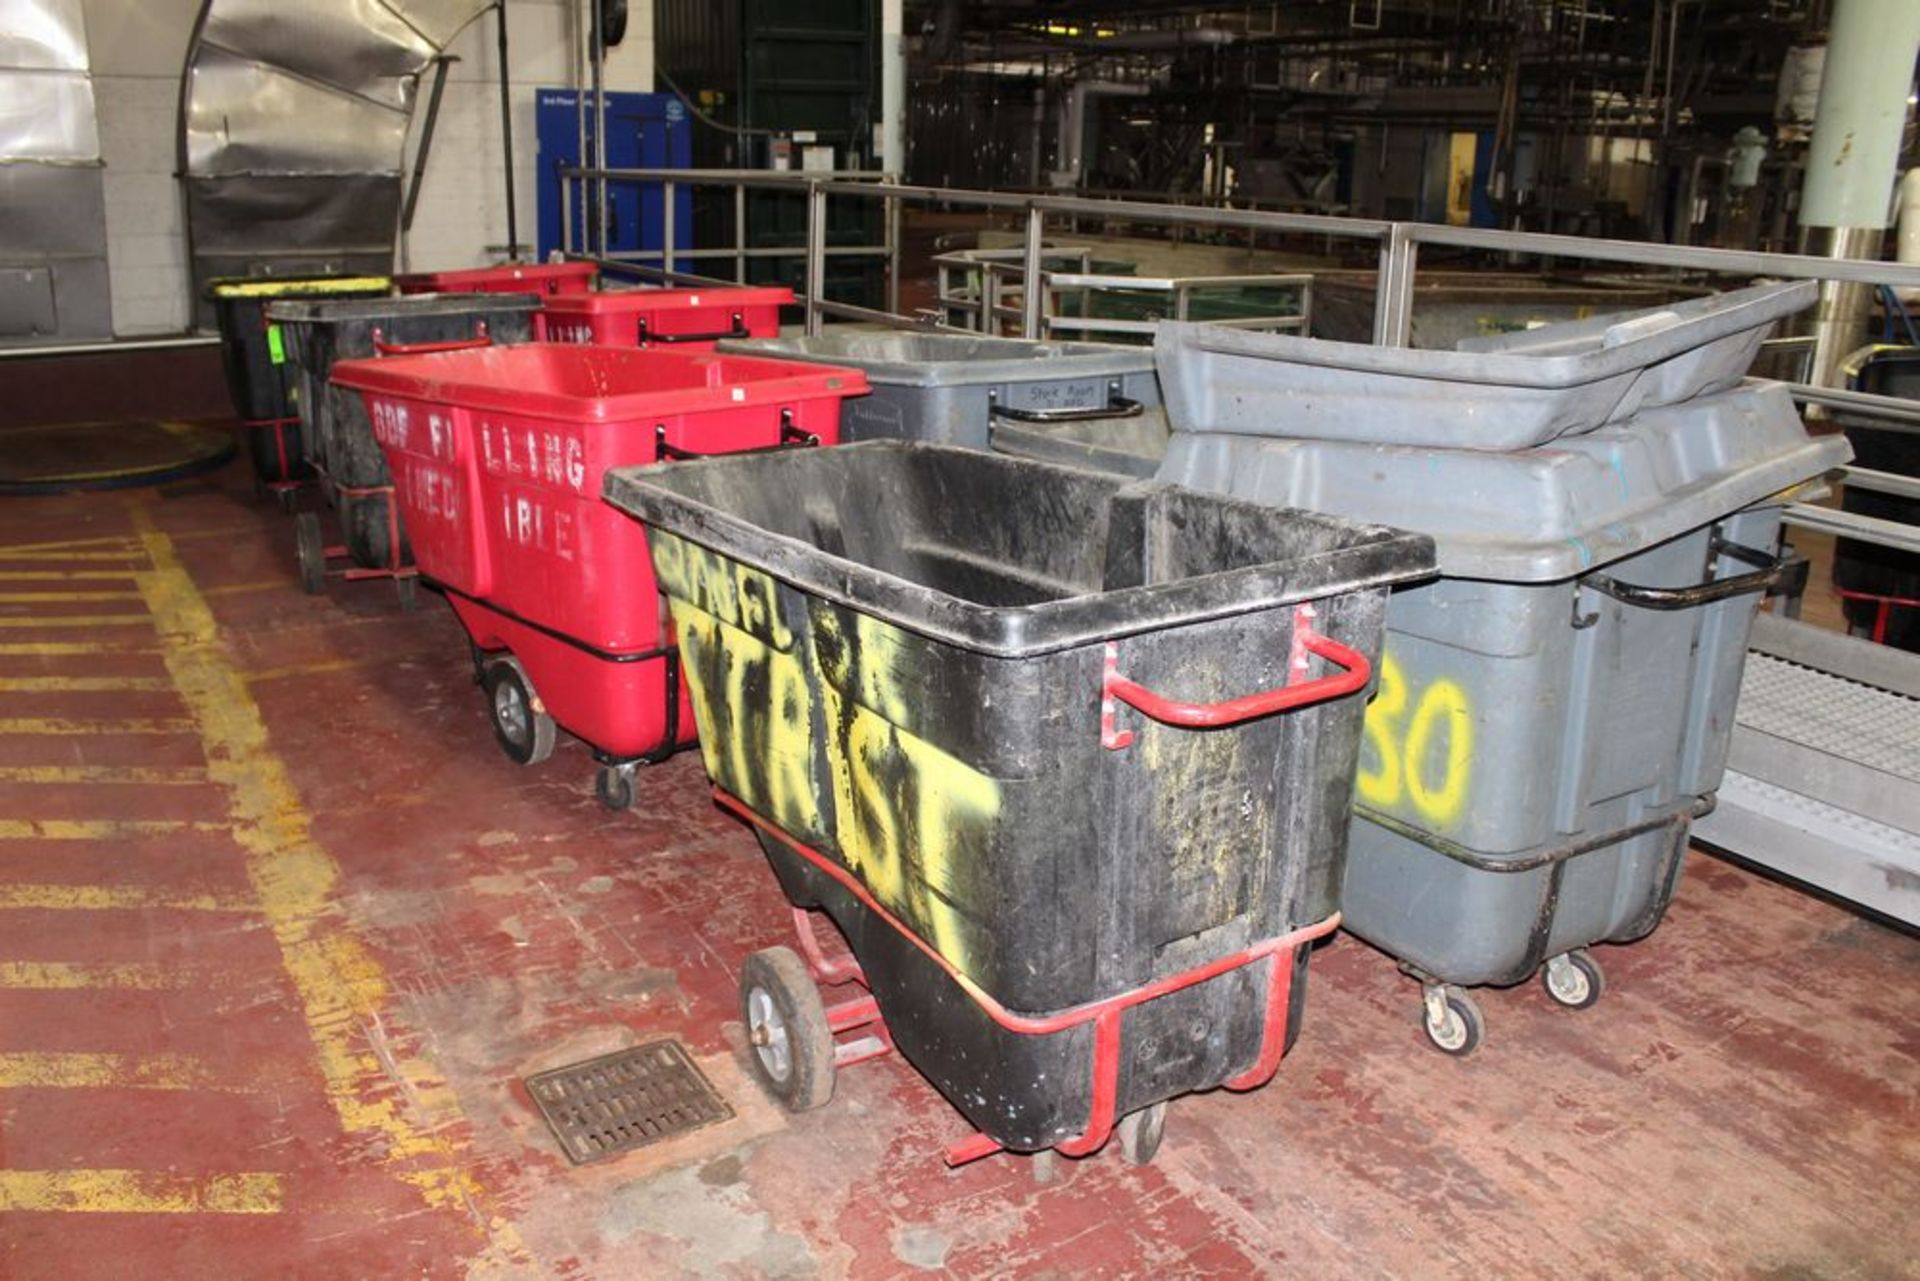 Large Wheeled trash cans as pictured or similar